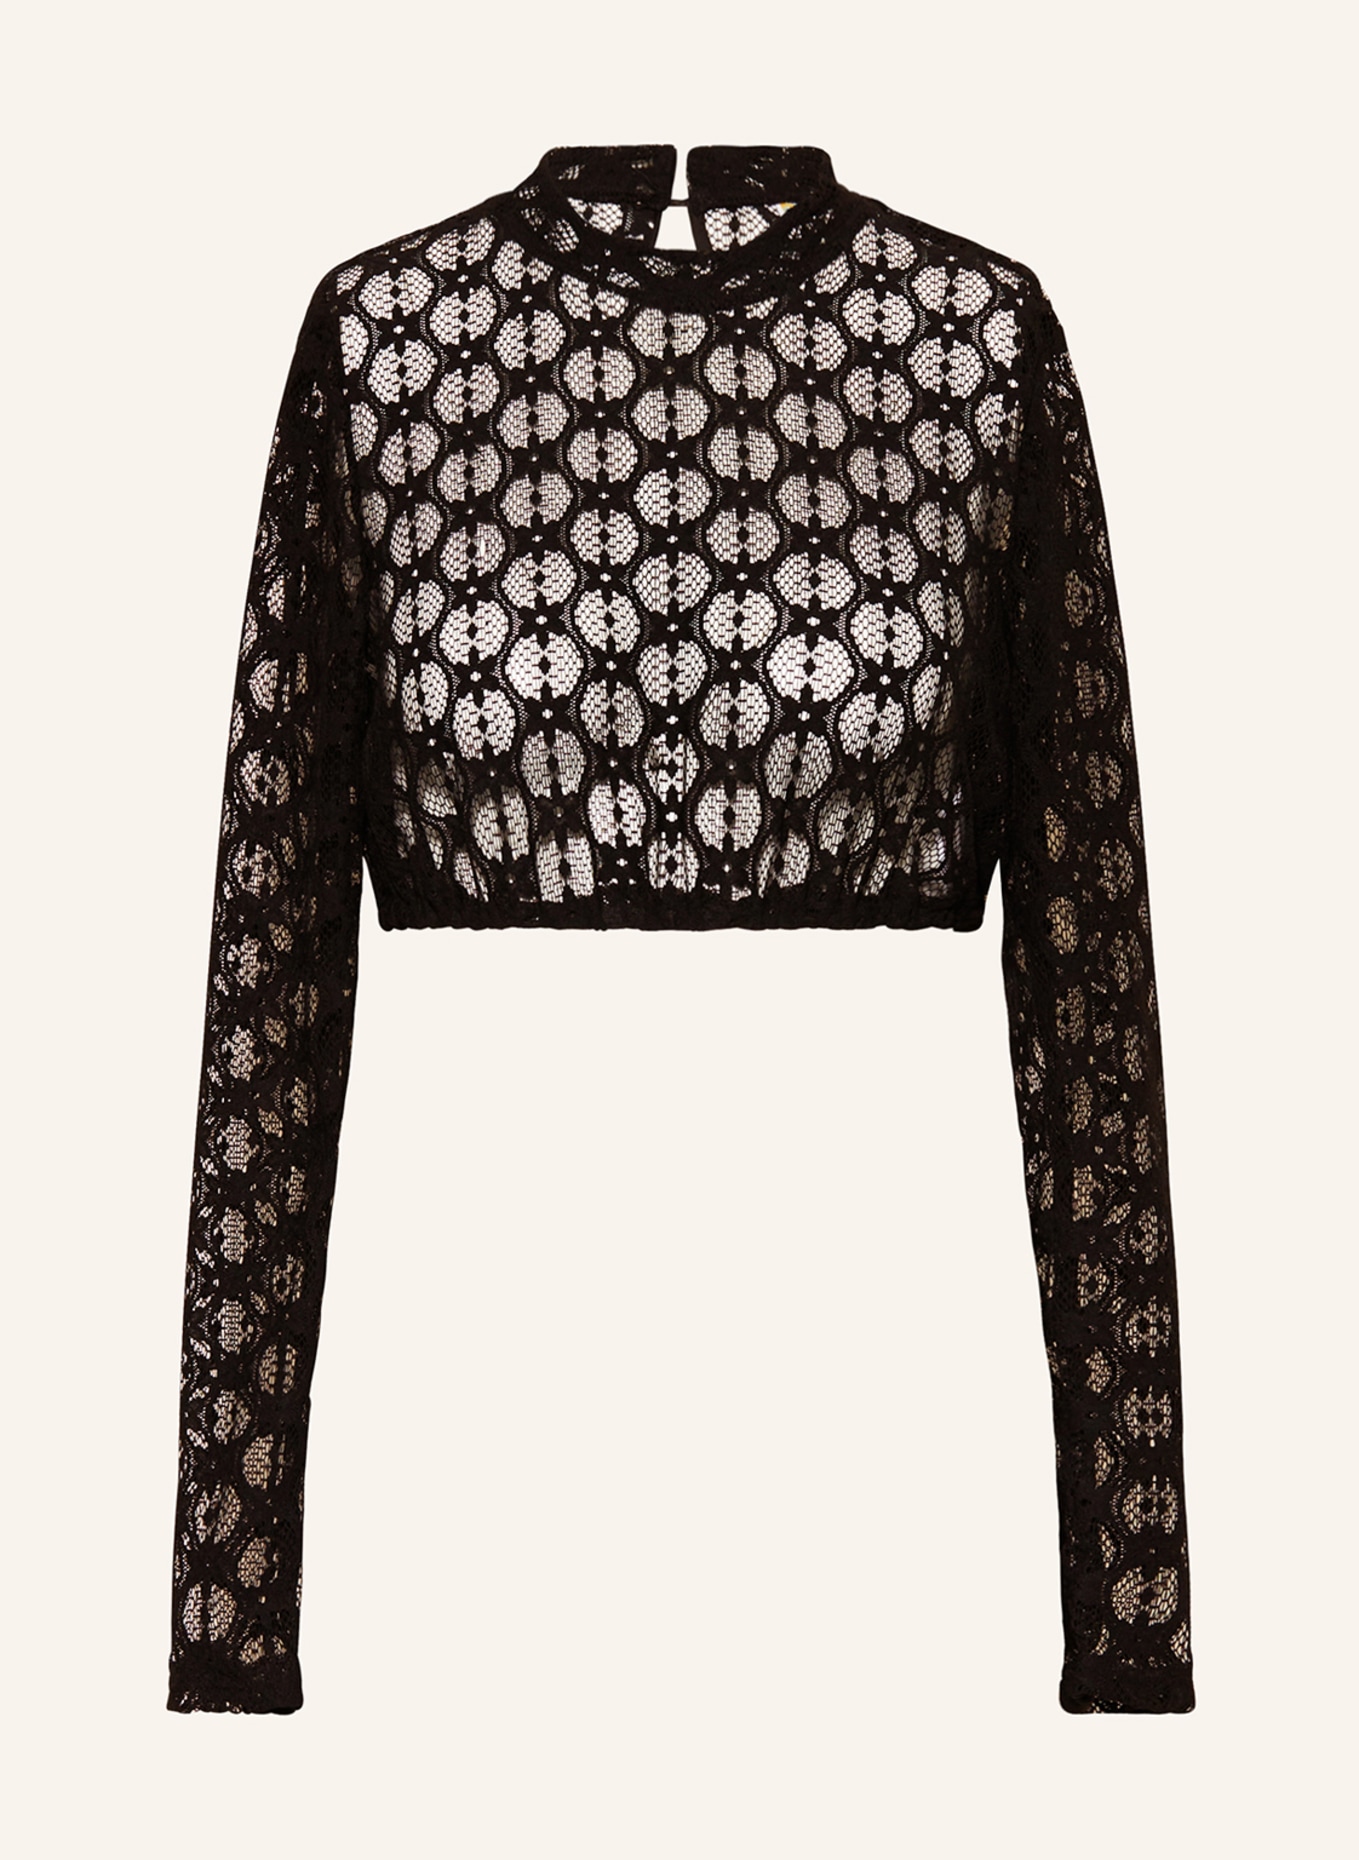 BERWIN & WOLFF Dirndl blouse made of lace, Color: BLACK (Image 1)